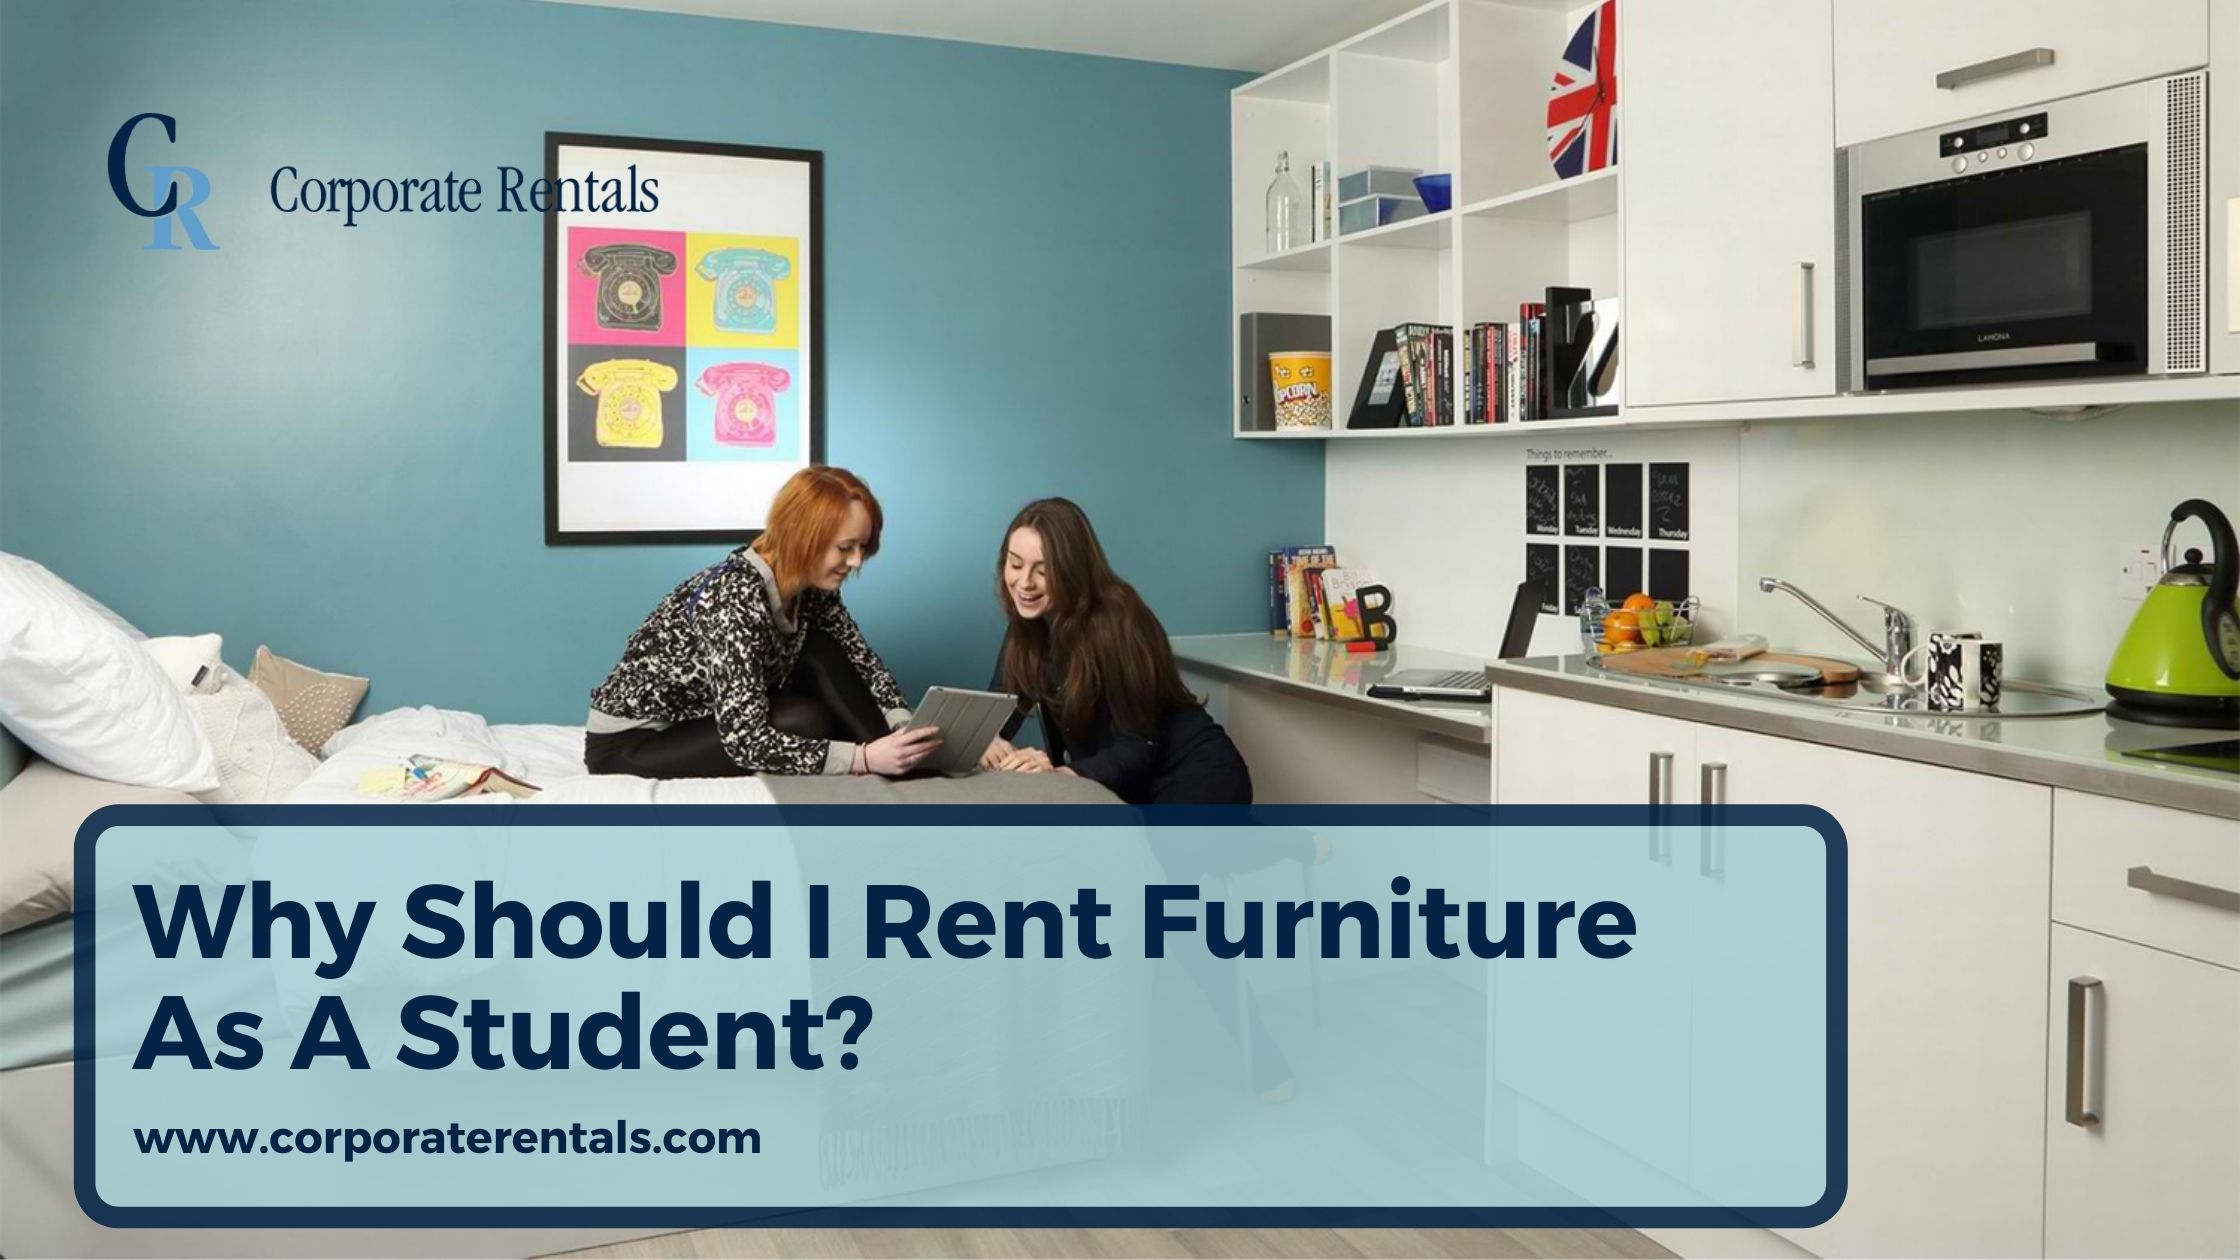 Why Should I Rent Furniture As A Student?